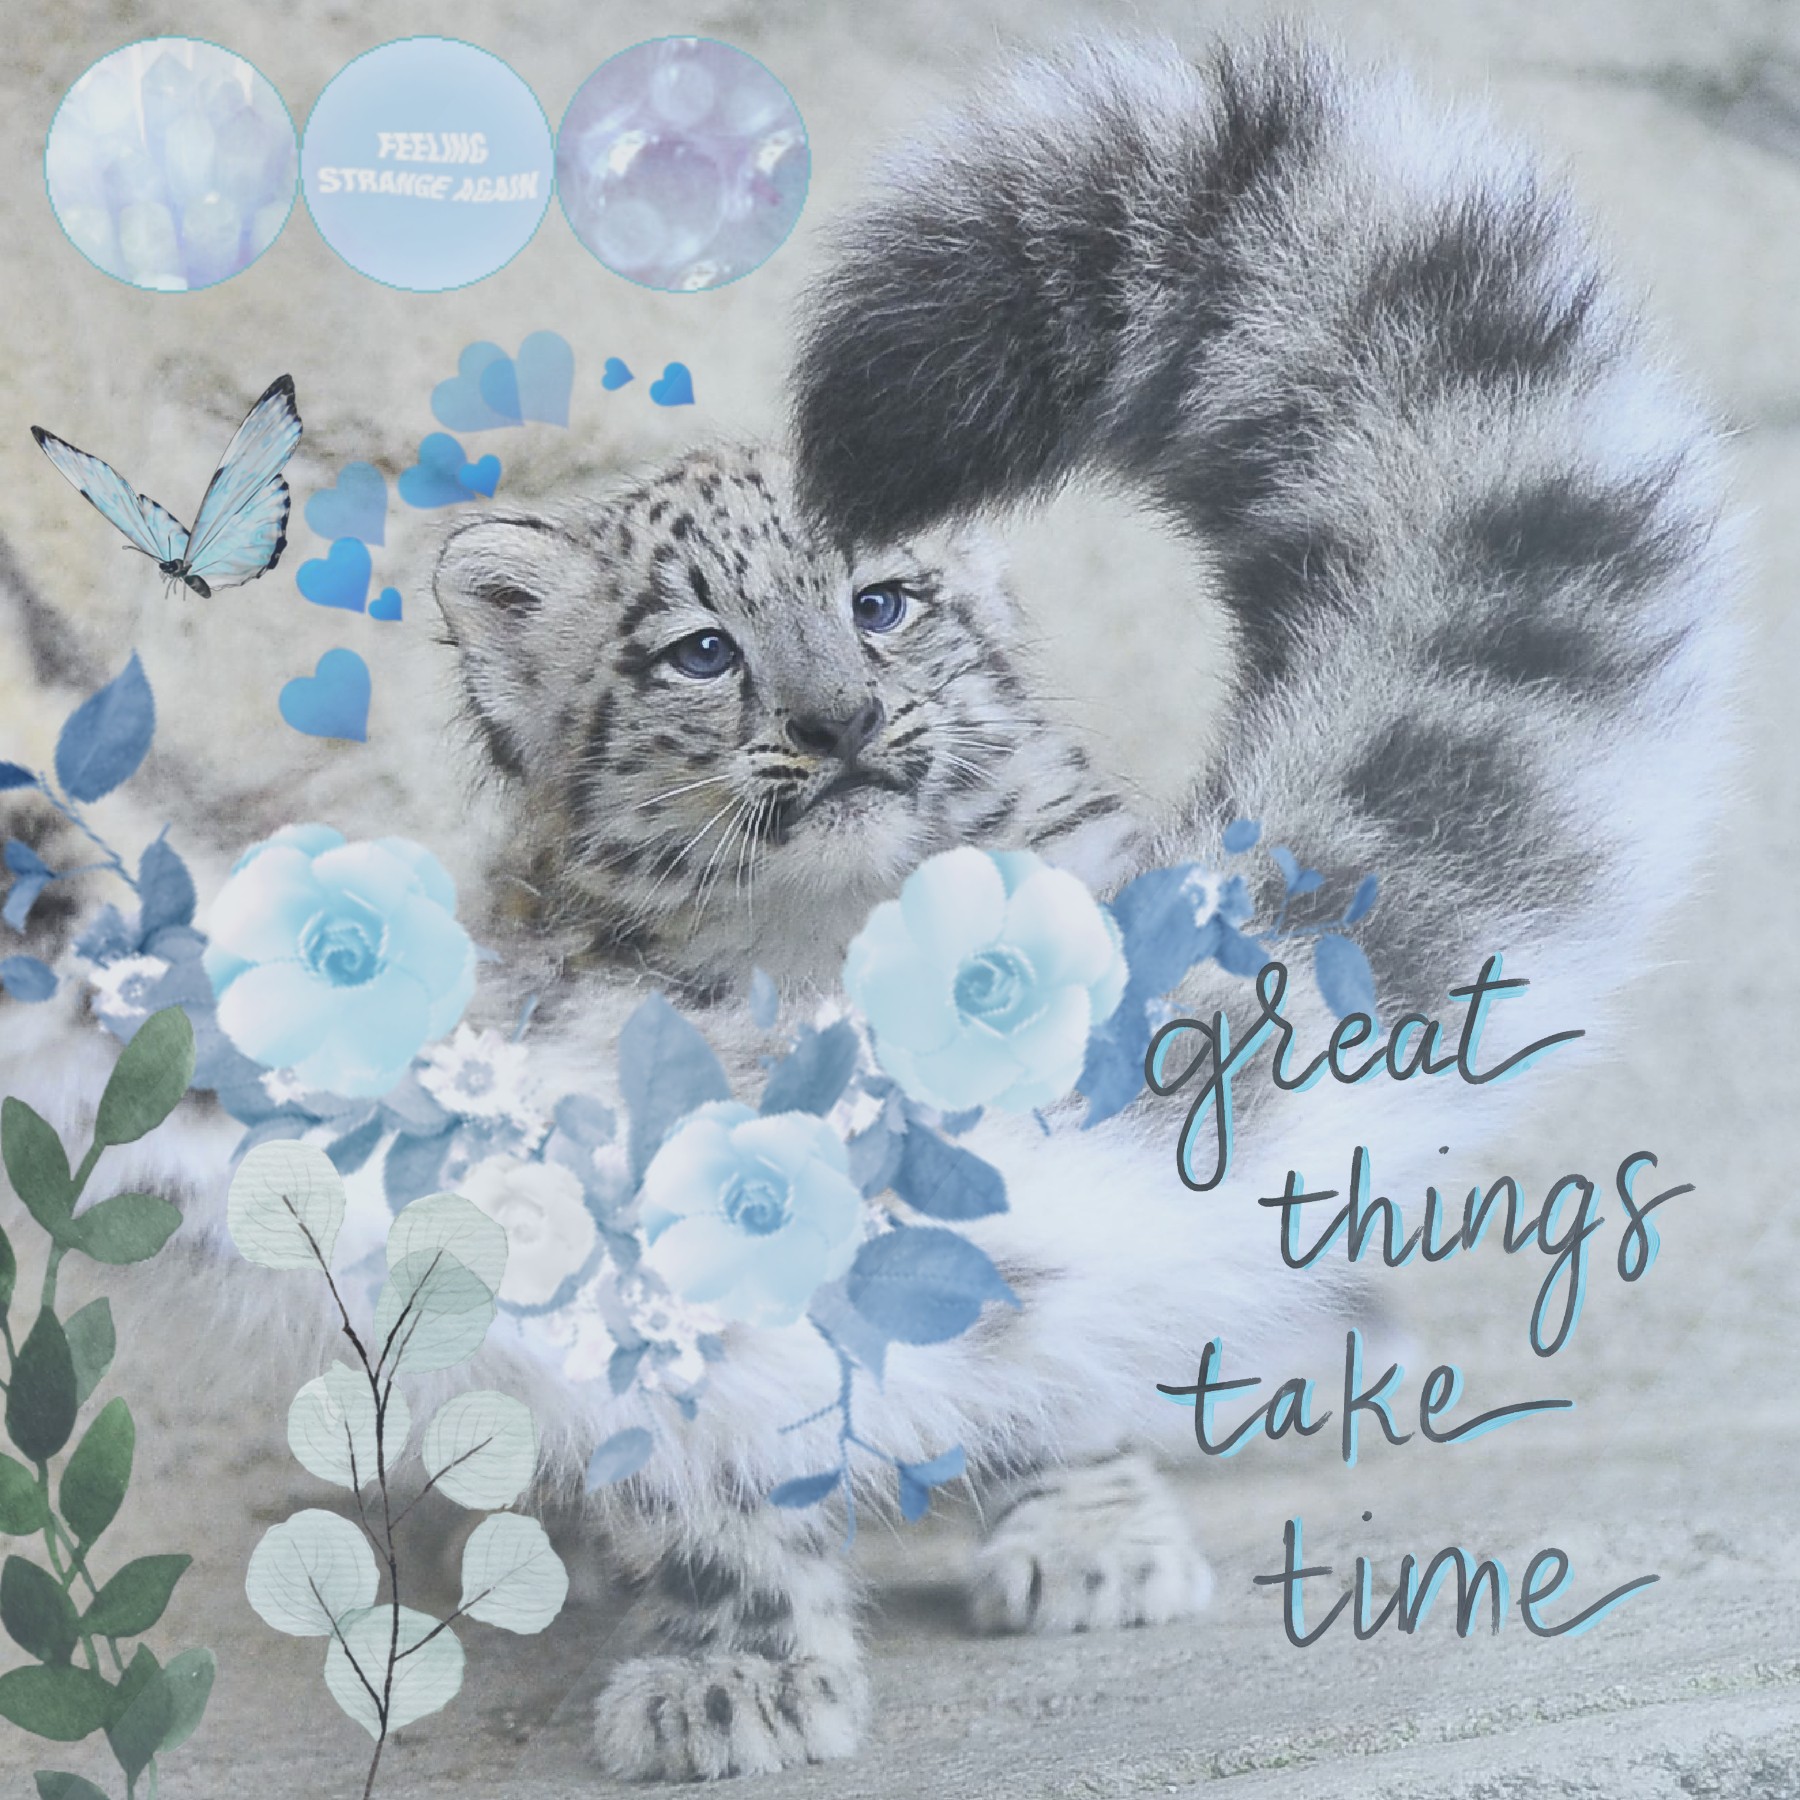 🦋🌱🦋
Aesthetic Snow Leopard Collage 

Sorry it's been awhile. School has been keeping me on my toes! And h8pages kinda ruined this community,  so I didn't want to use it anymore. But I'm back!!!